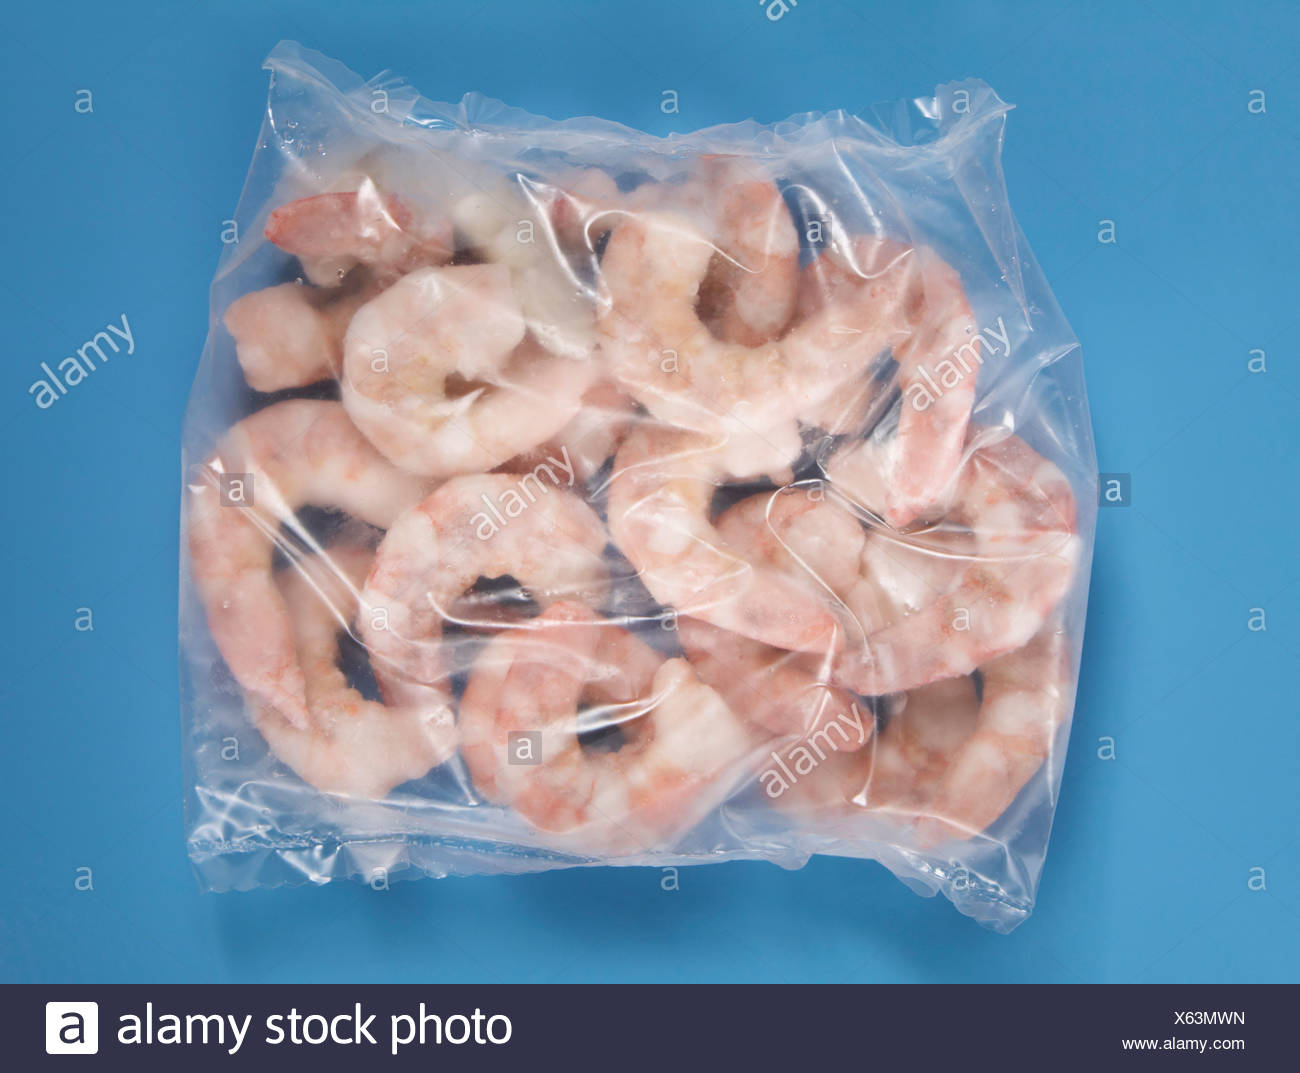 Download Frozen Shrimps In Plastic Bag Elevated View Stock Photo Alamy Yellowimages Mockups